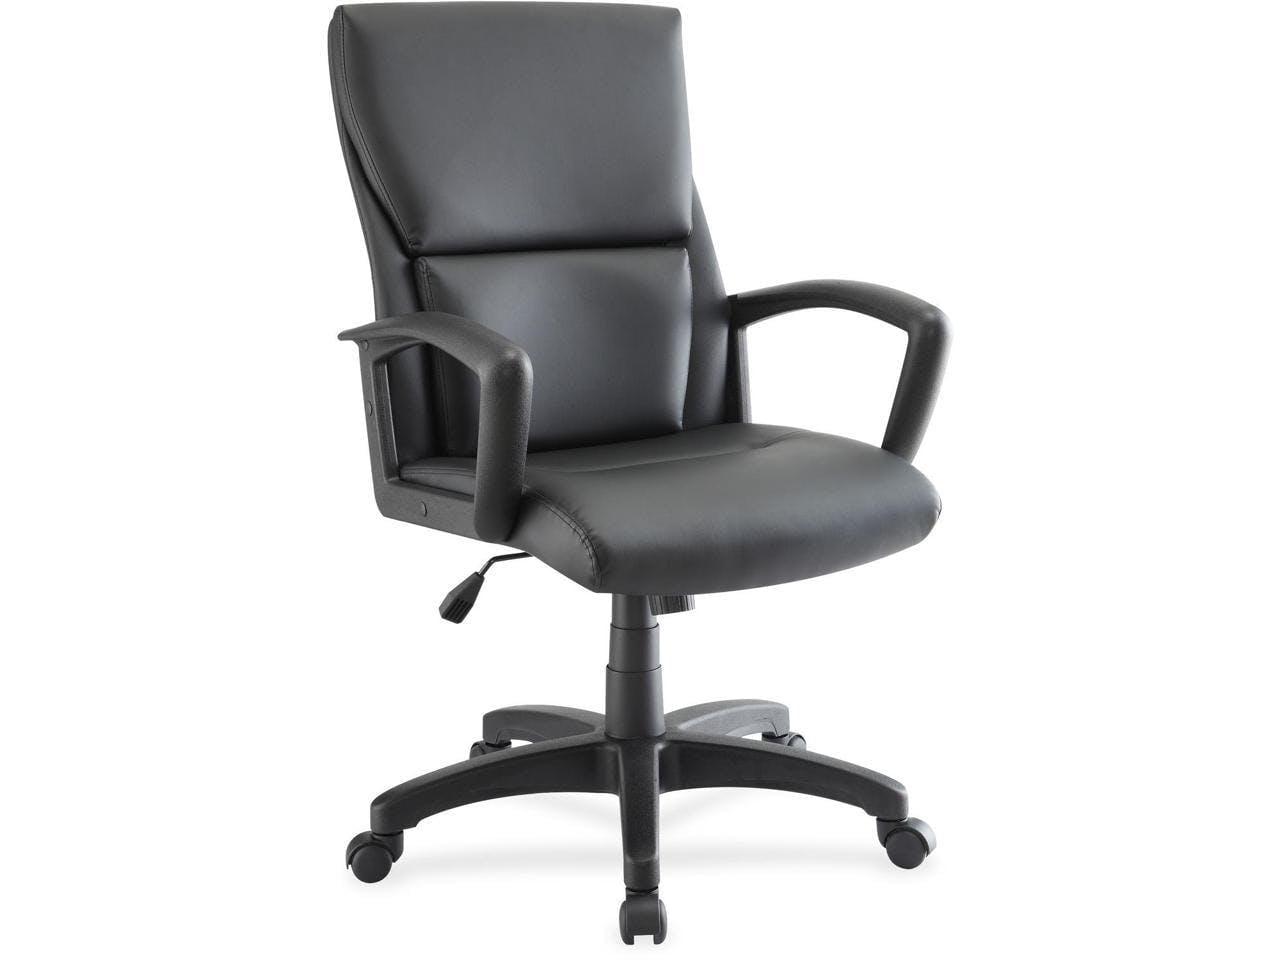 Euro-Inspired Mid-Back Black Leather Executive Swivel Chair